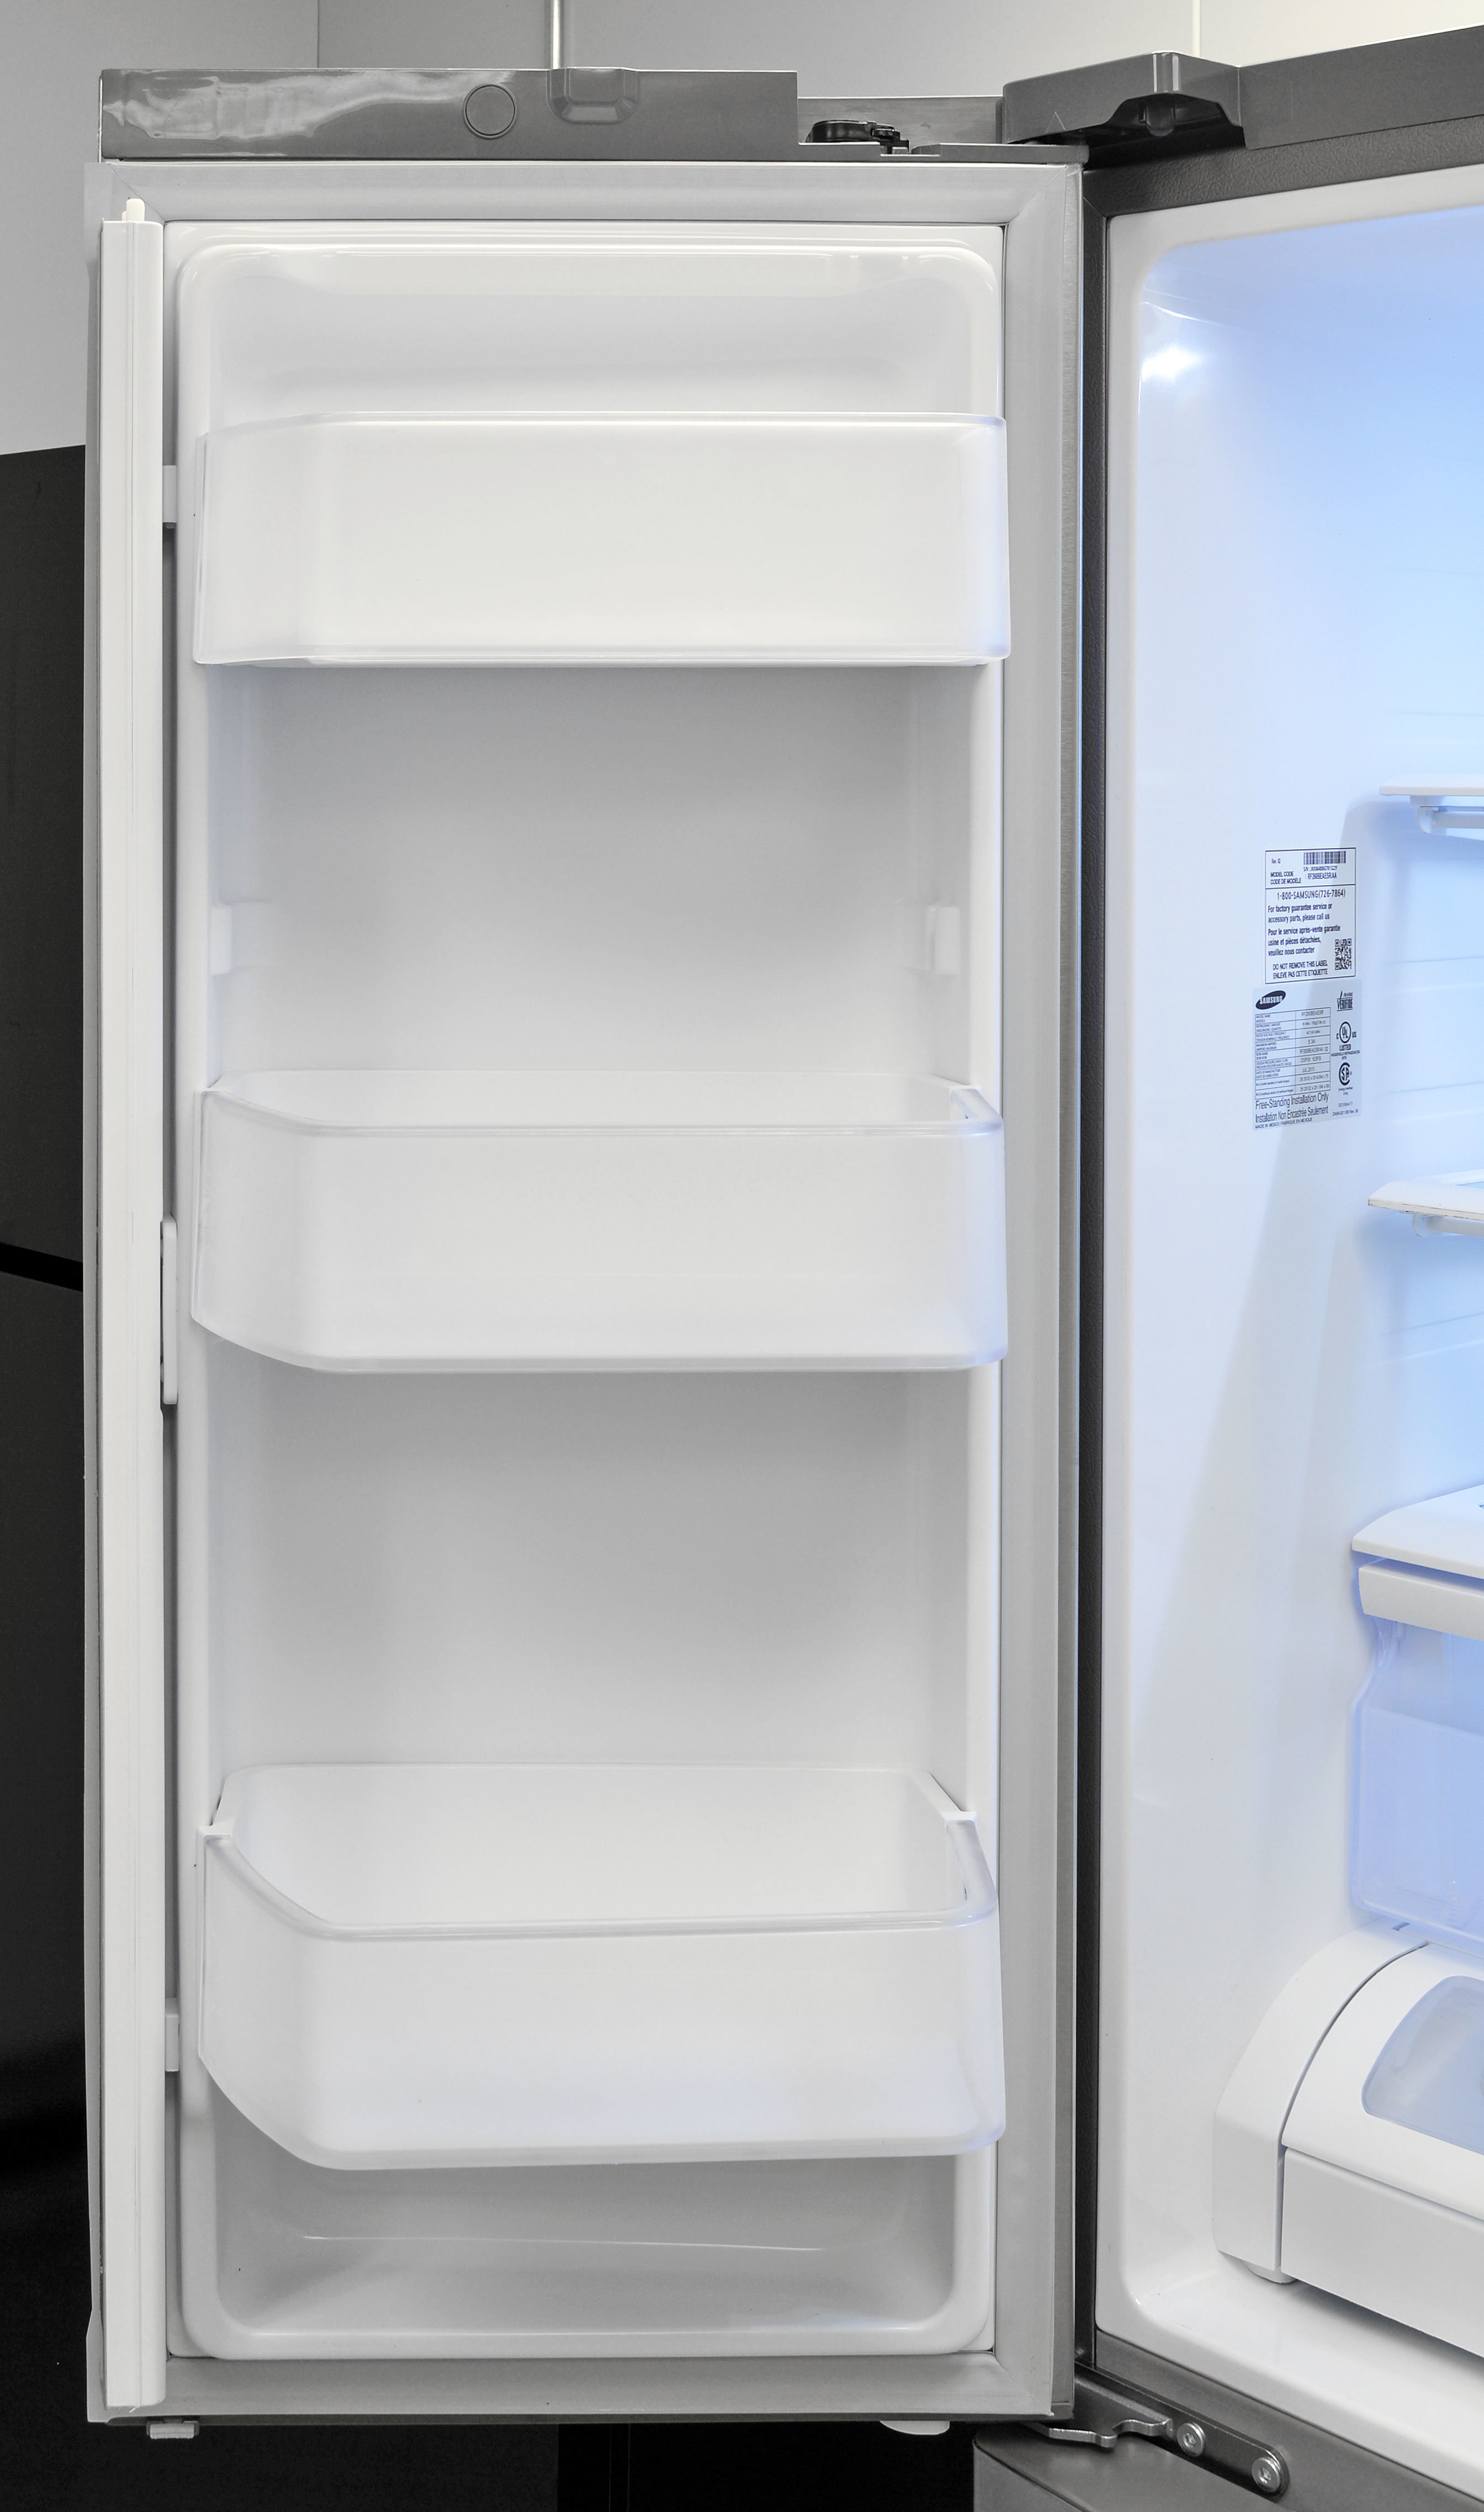 Why are some Samsung fridges more expensive than others?